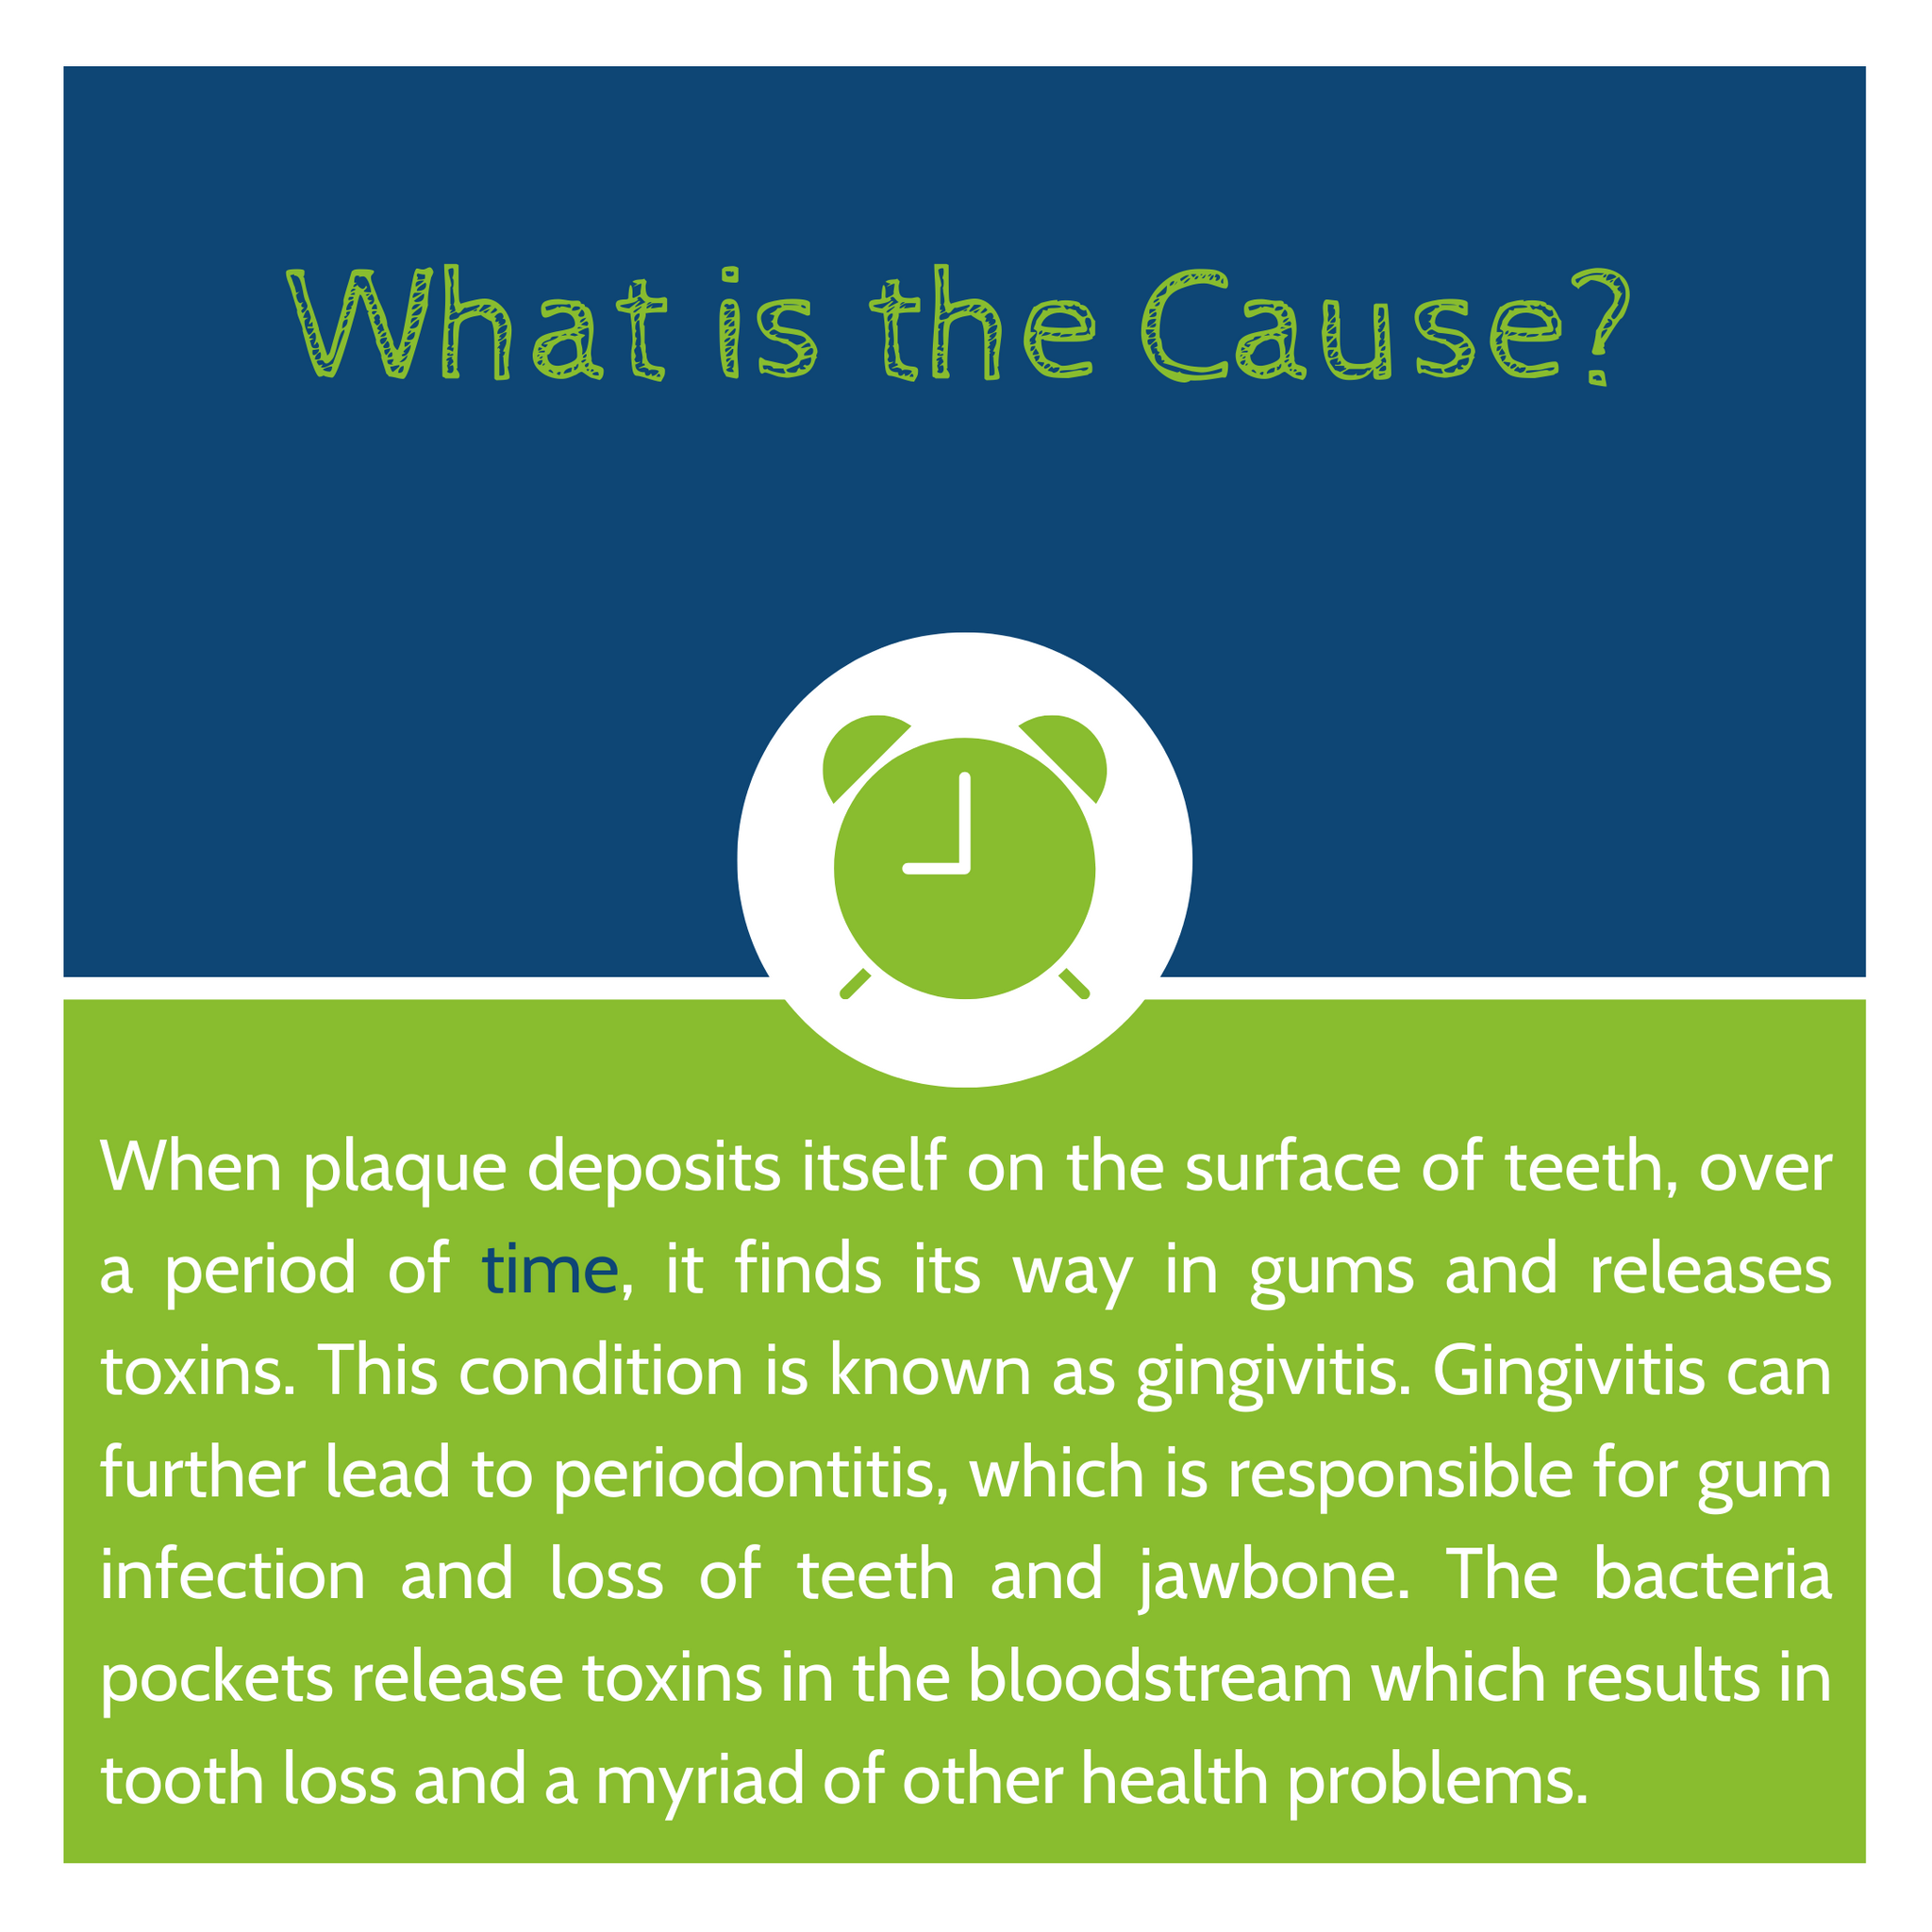 When plaque deposits itself on the surface of teeth, over a period of time, it finds its way in gums and releases toxins. This condition is known as gingivitis. Gingivitis can further lead to periodontitis, which is responsible for gum infection and loss of teeth and jawbone. The bacteria pockets release toxins in the bloodstream which results in tooth loss and a myriad of other health problems.